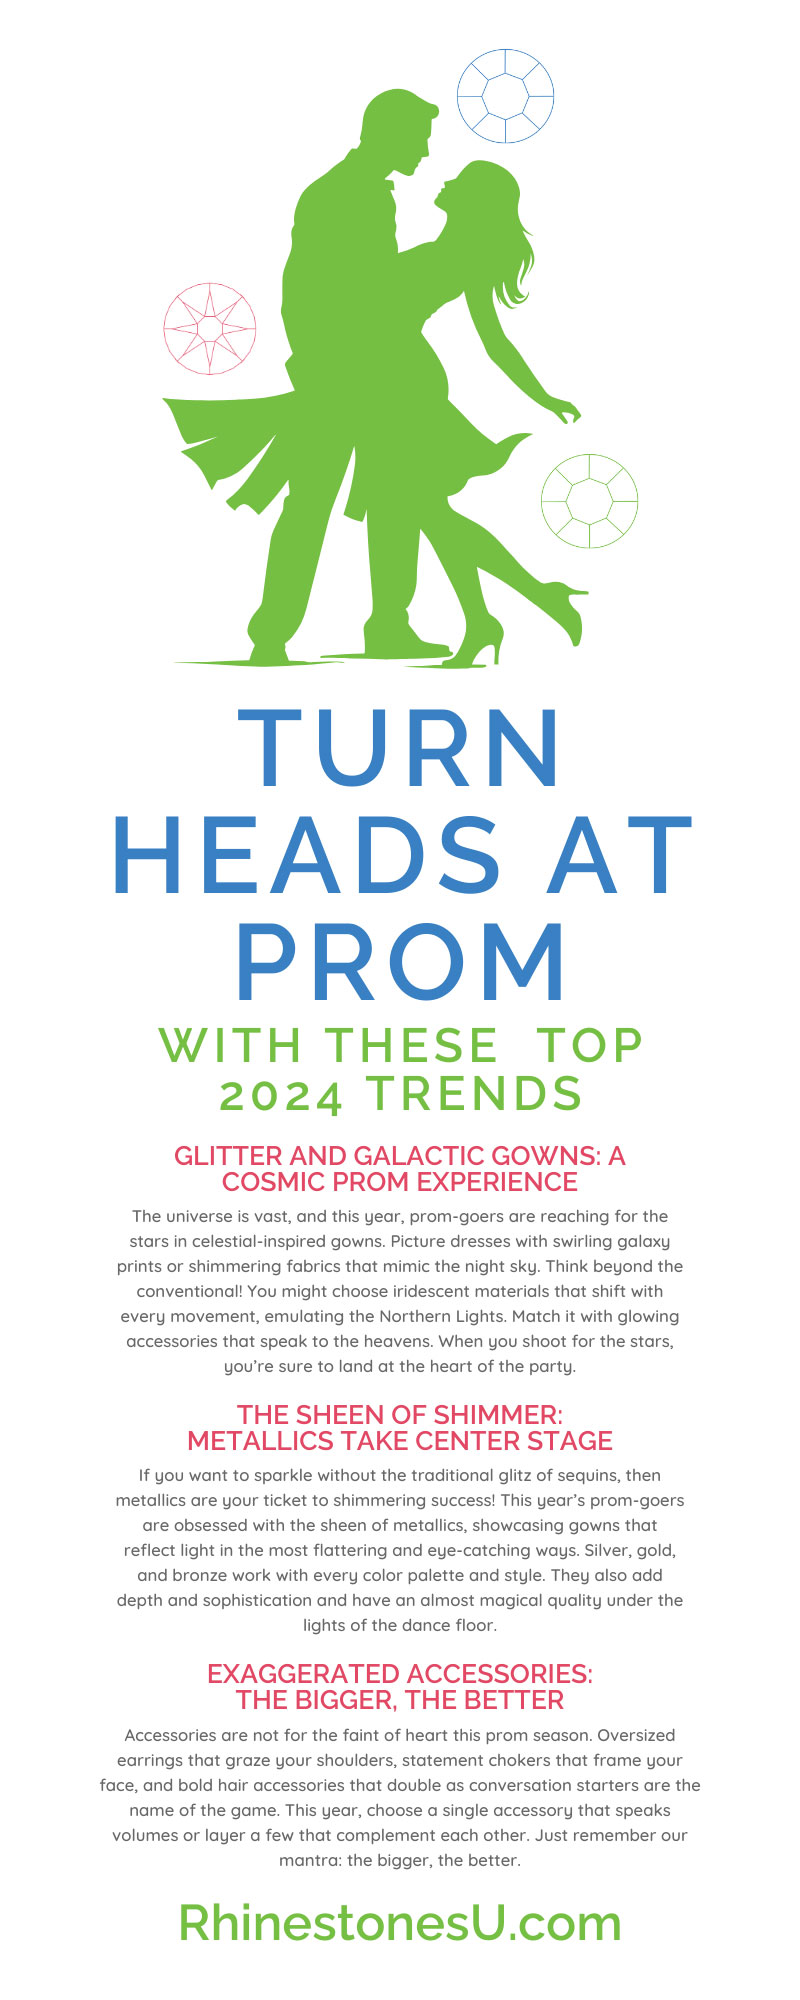 Turn Heads at Prom With These Top 2024 Trends